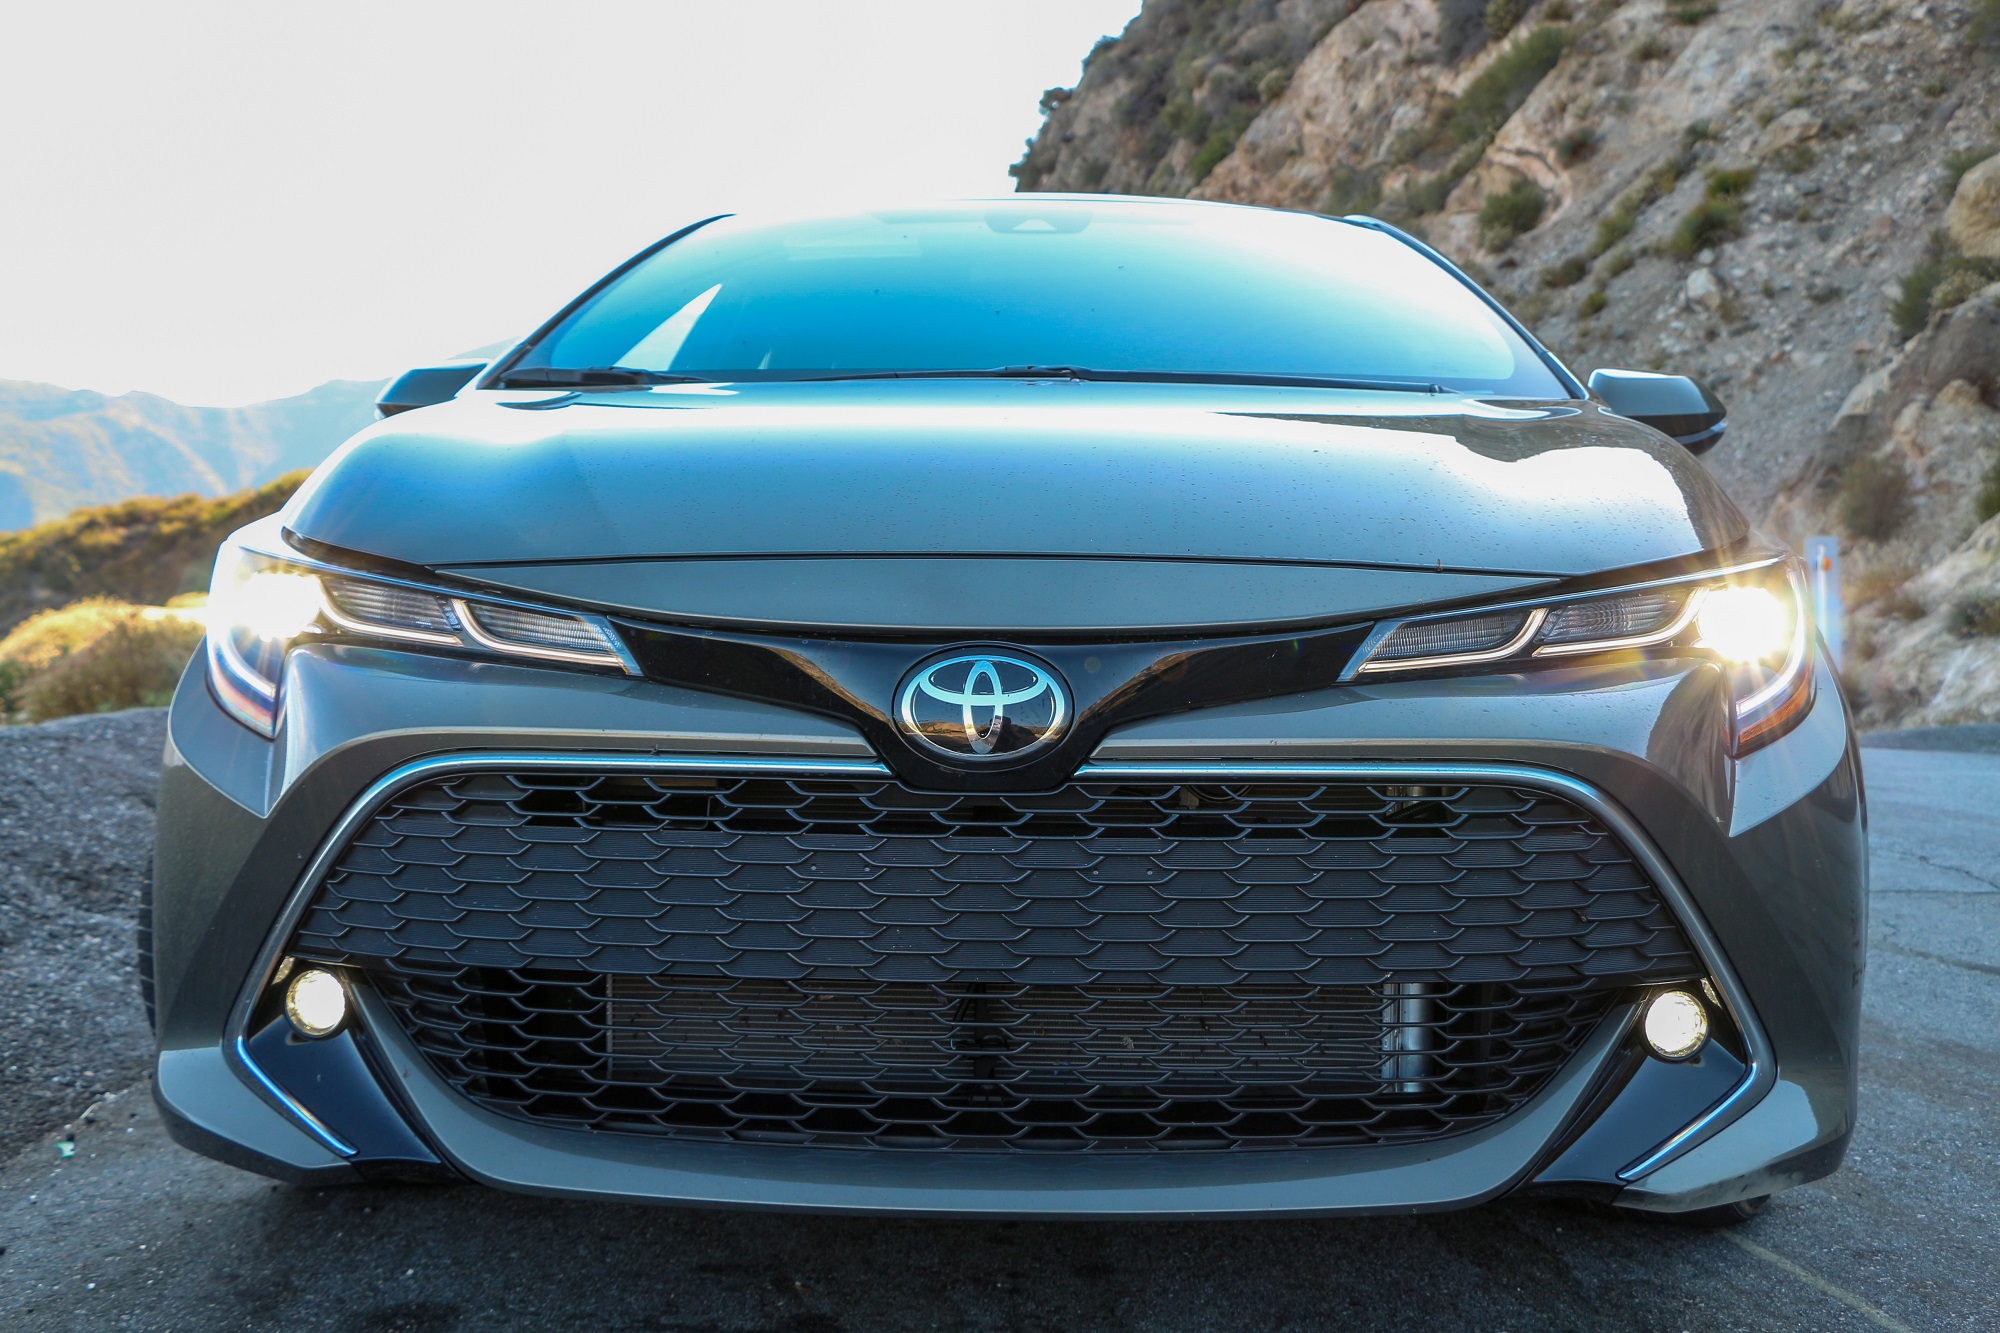 2019 Toyota Corolla Hatchback Review Bringing Fun To The